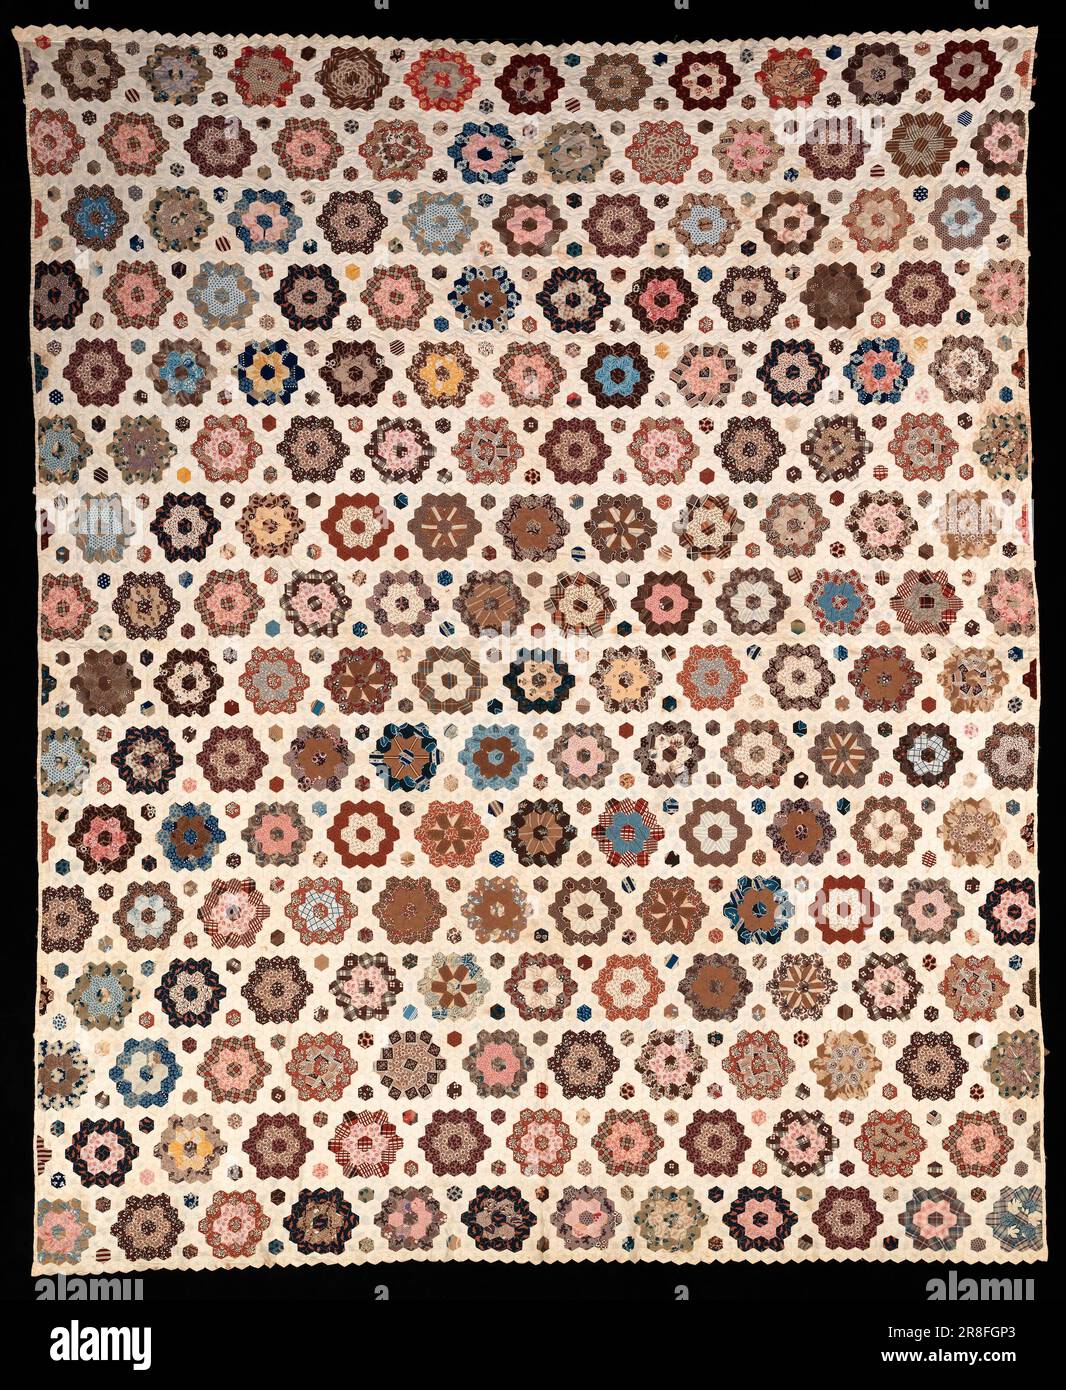 Pieced Quilt 1861 by Mary Anne Jefferson Healy, born Round Hill, Nova Scotia, Canada 1847-died Minneapolis, MN 1928 Stock Photo